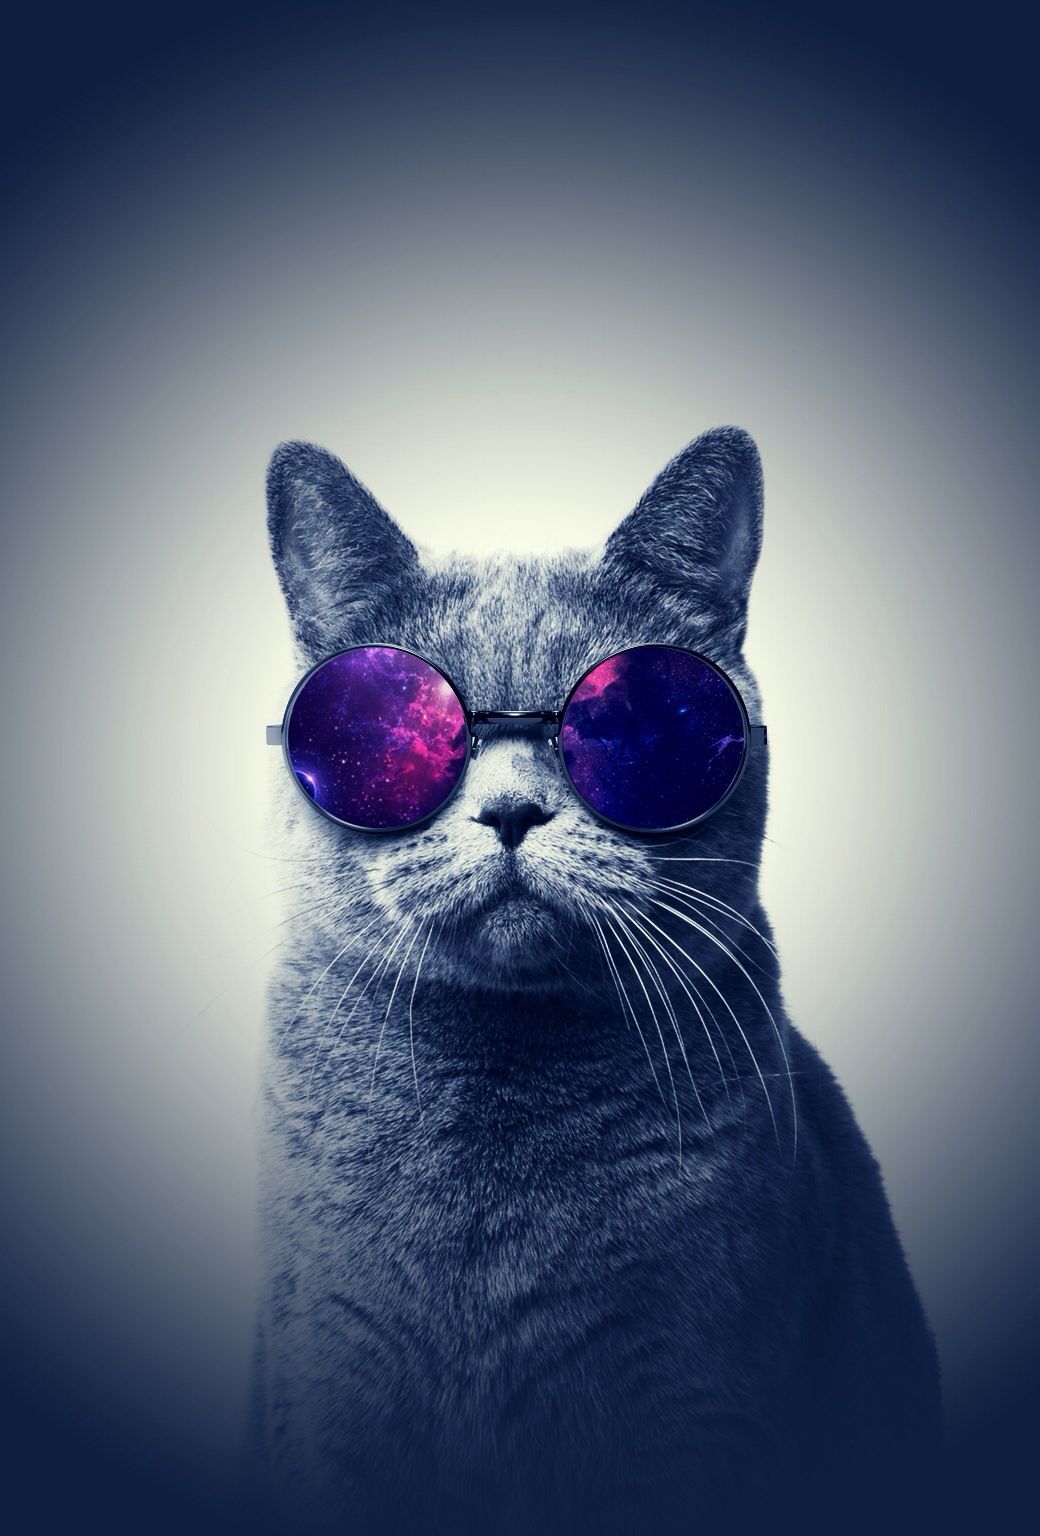 A cat wearing sunglasses with the reflection of the universe in them - Cat